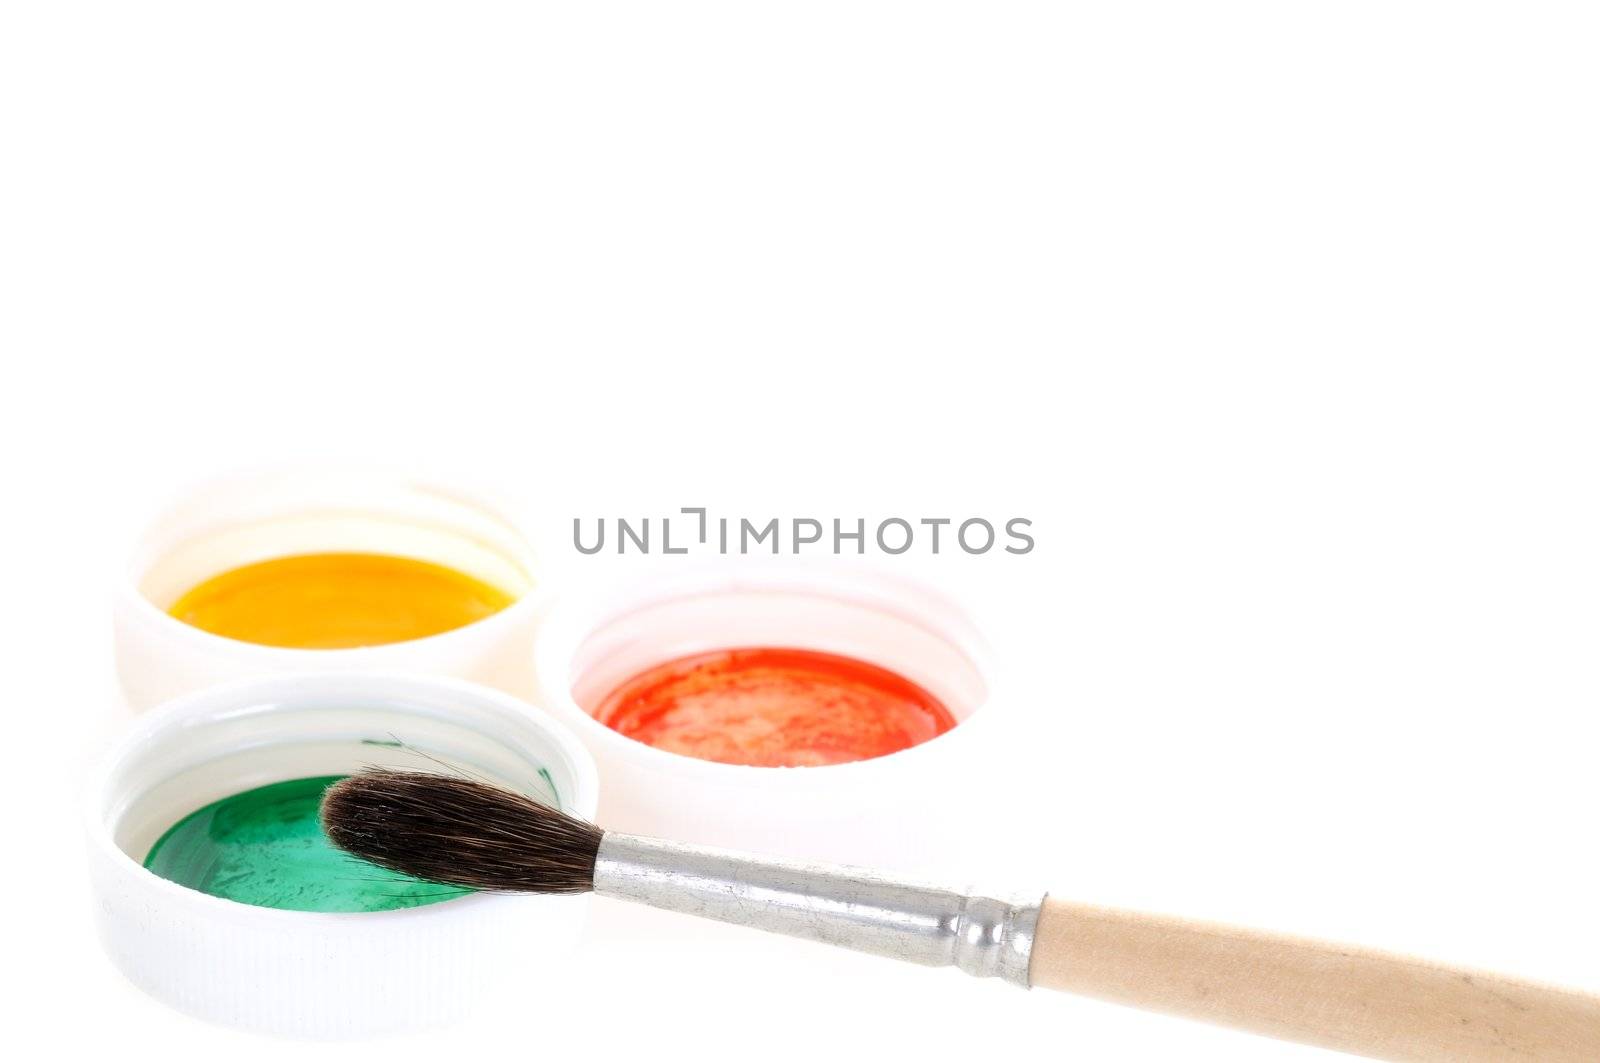 Small brush with three paint covers on white background